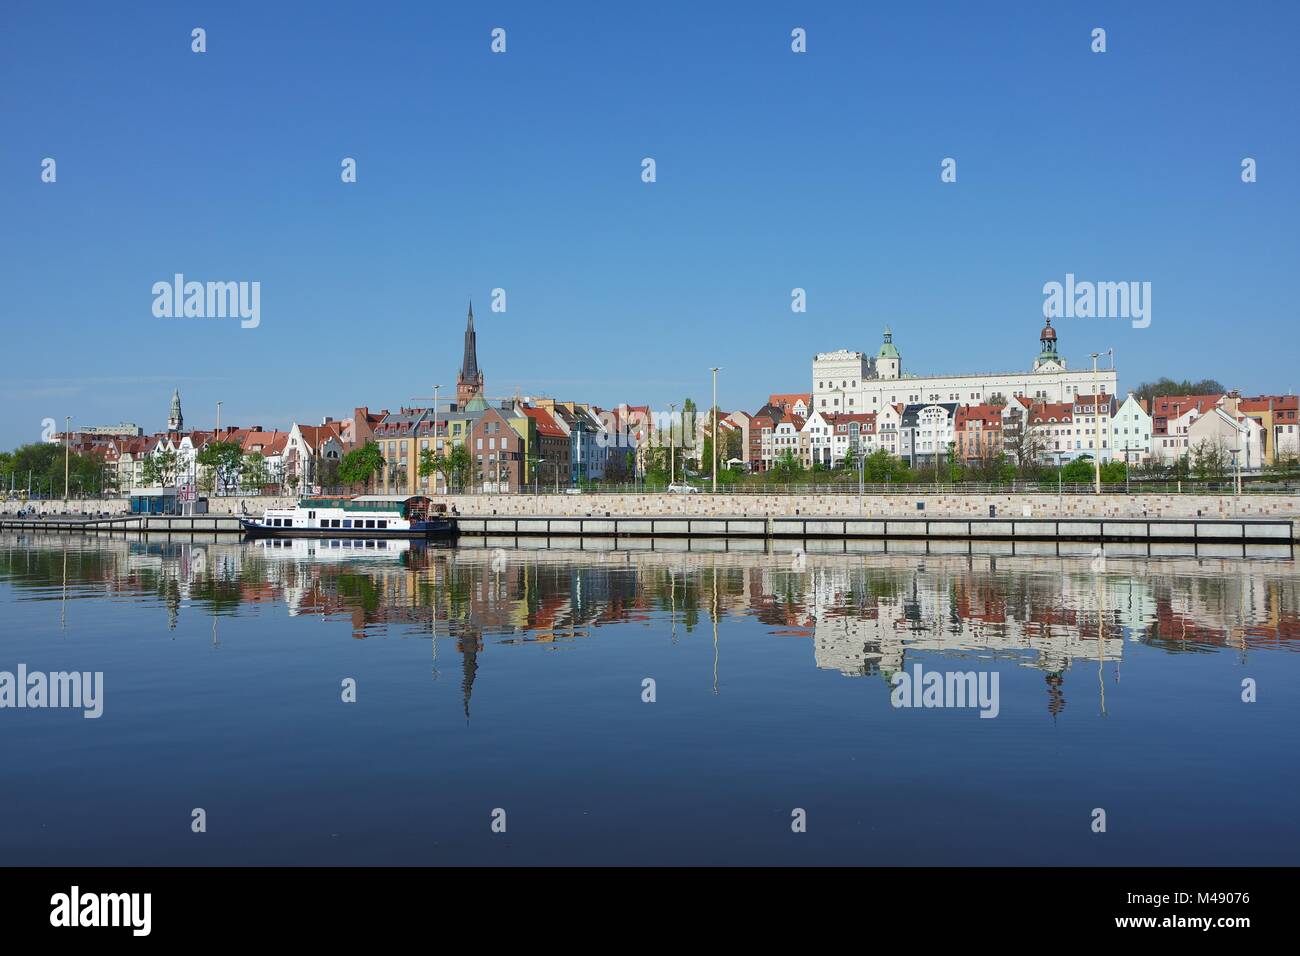 Szczecin, Old Town on the Odra River Stock Photo